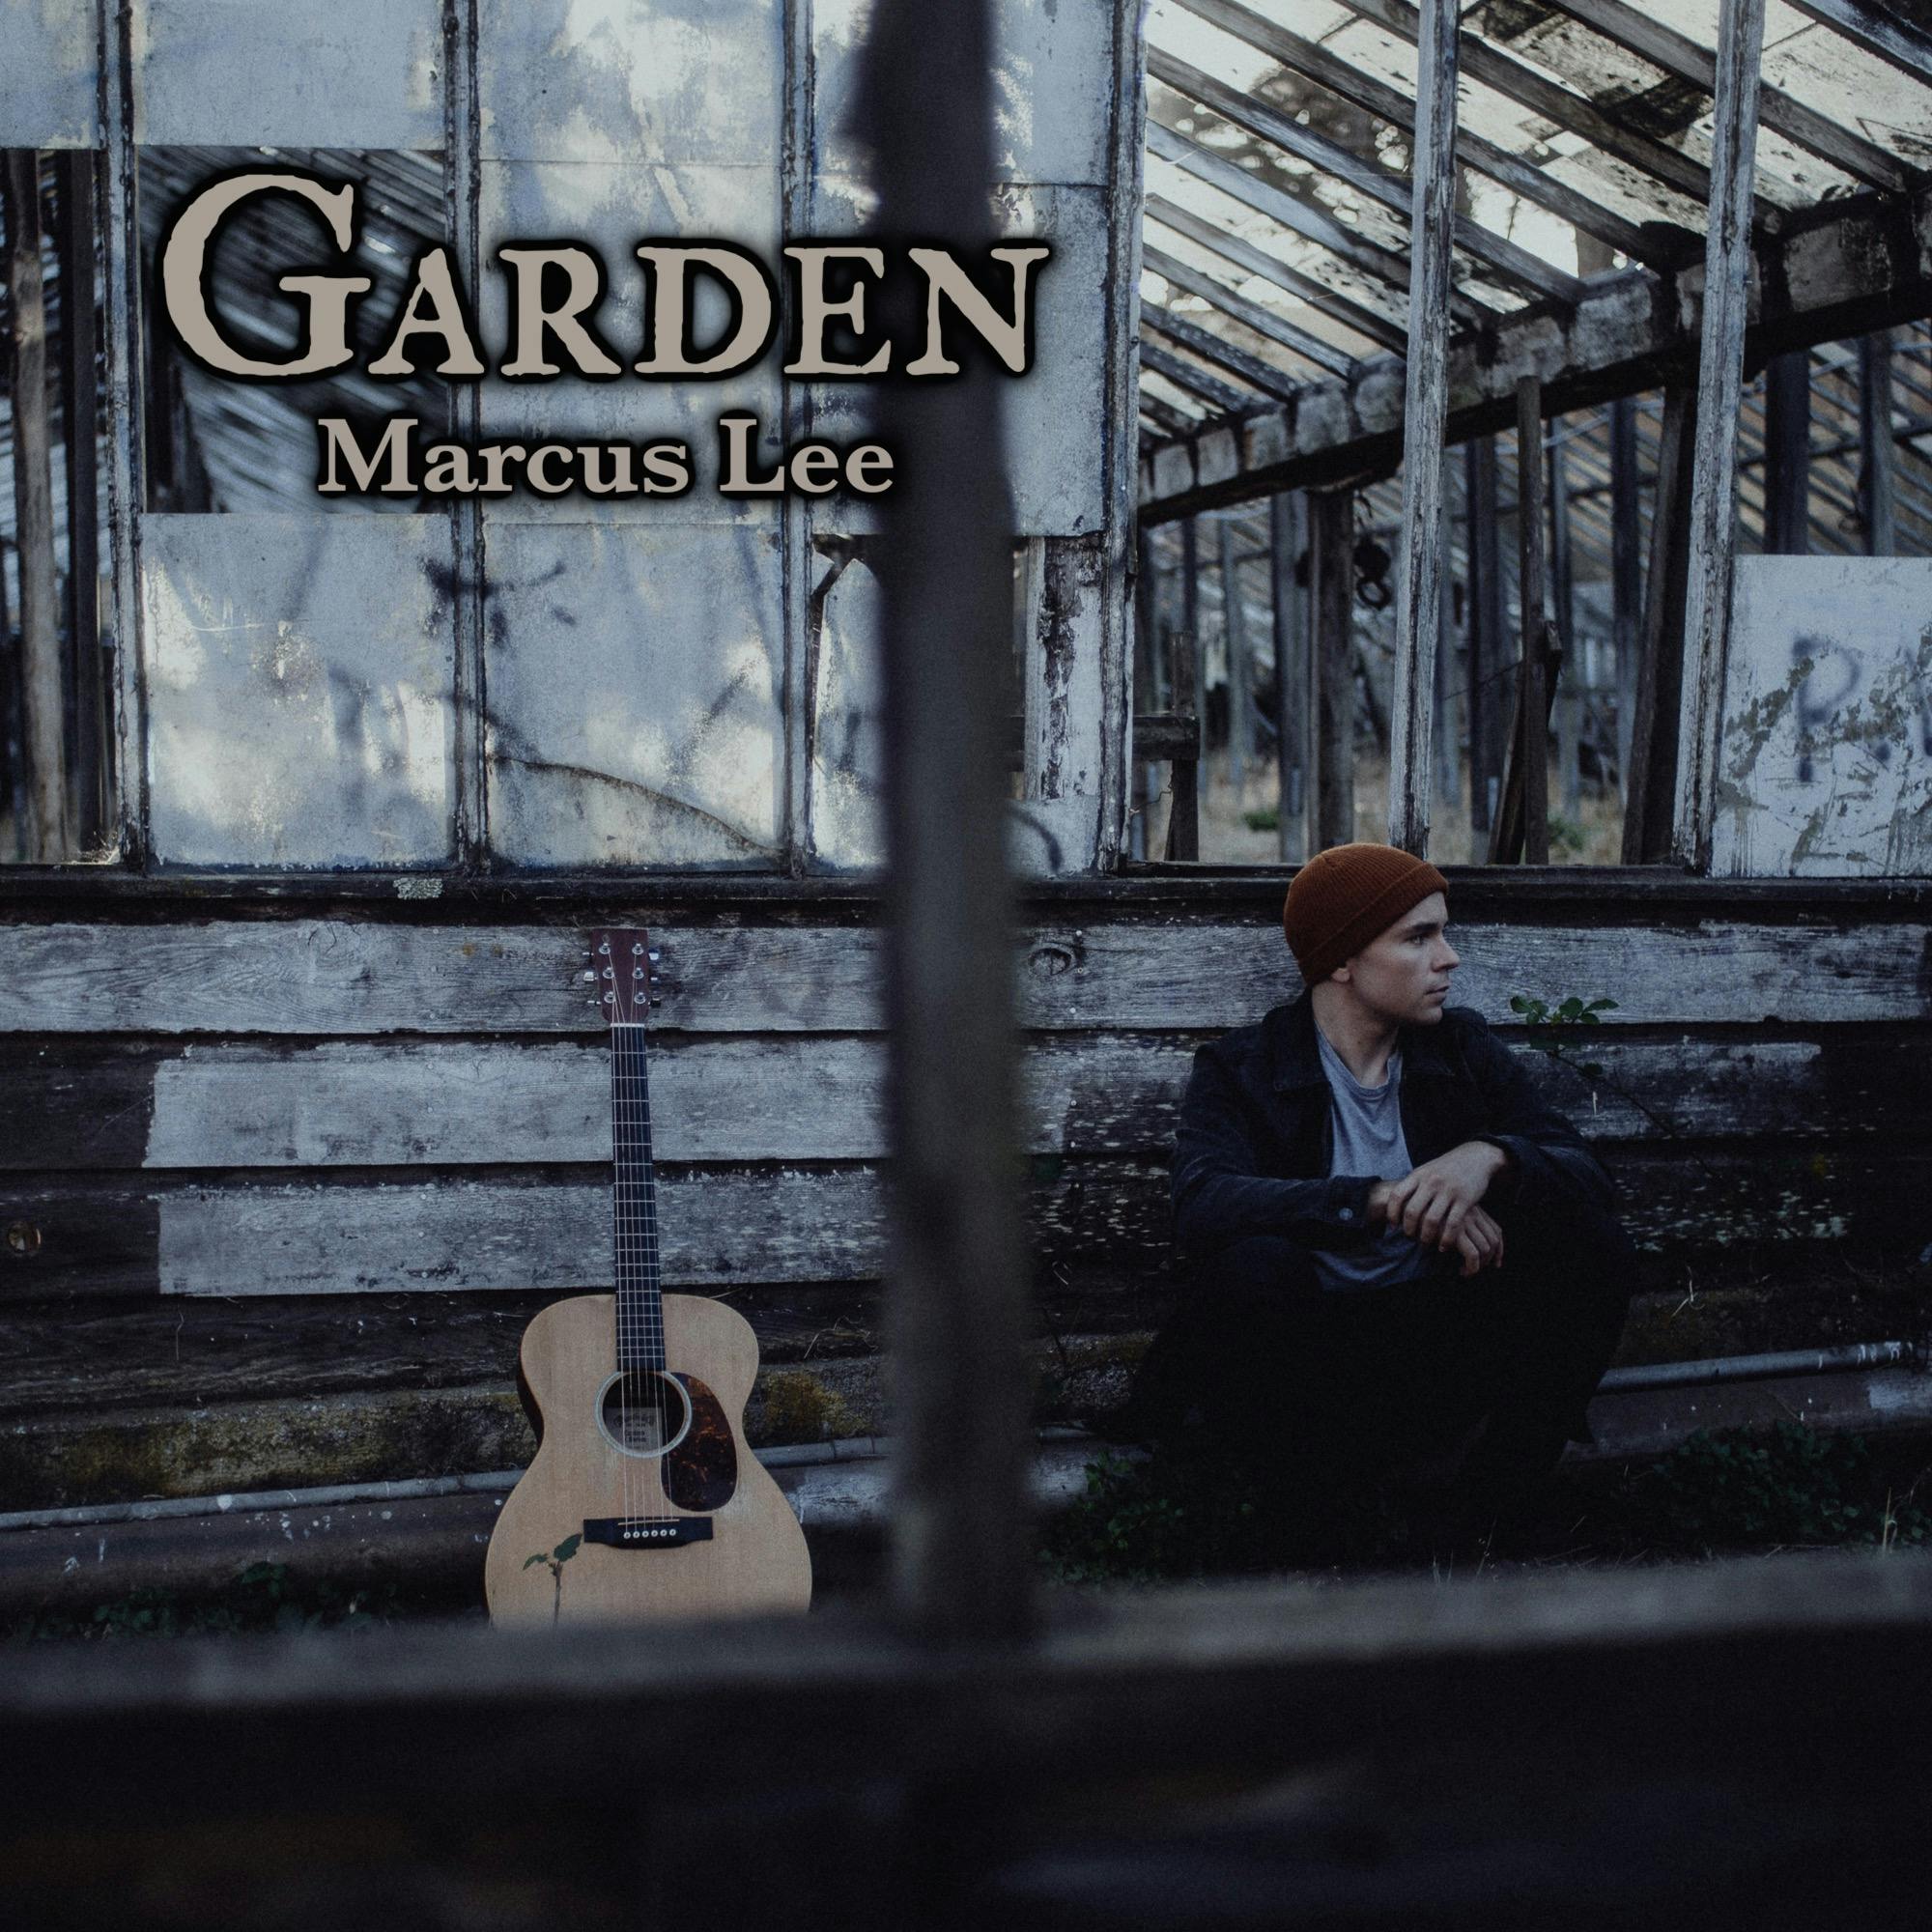 Cover art for Garden by Marcus Lee